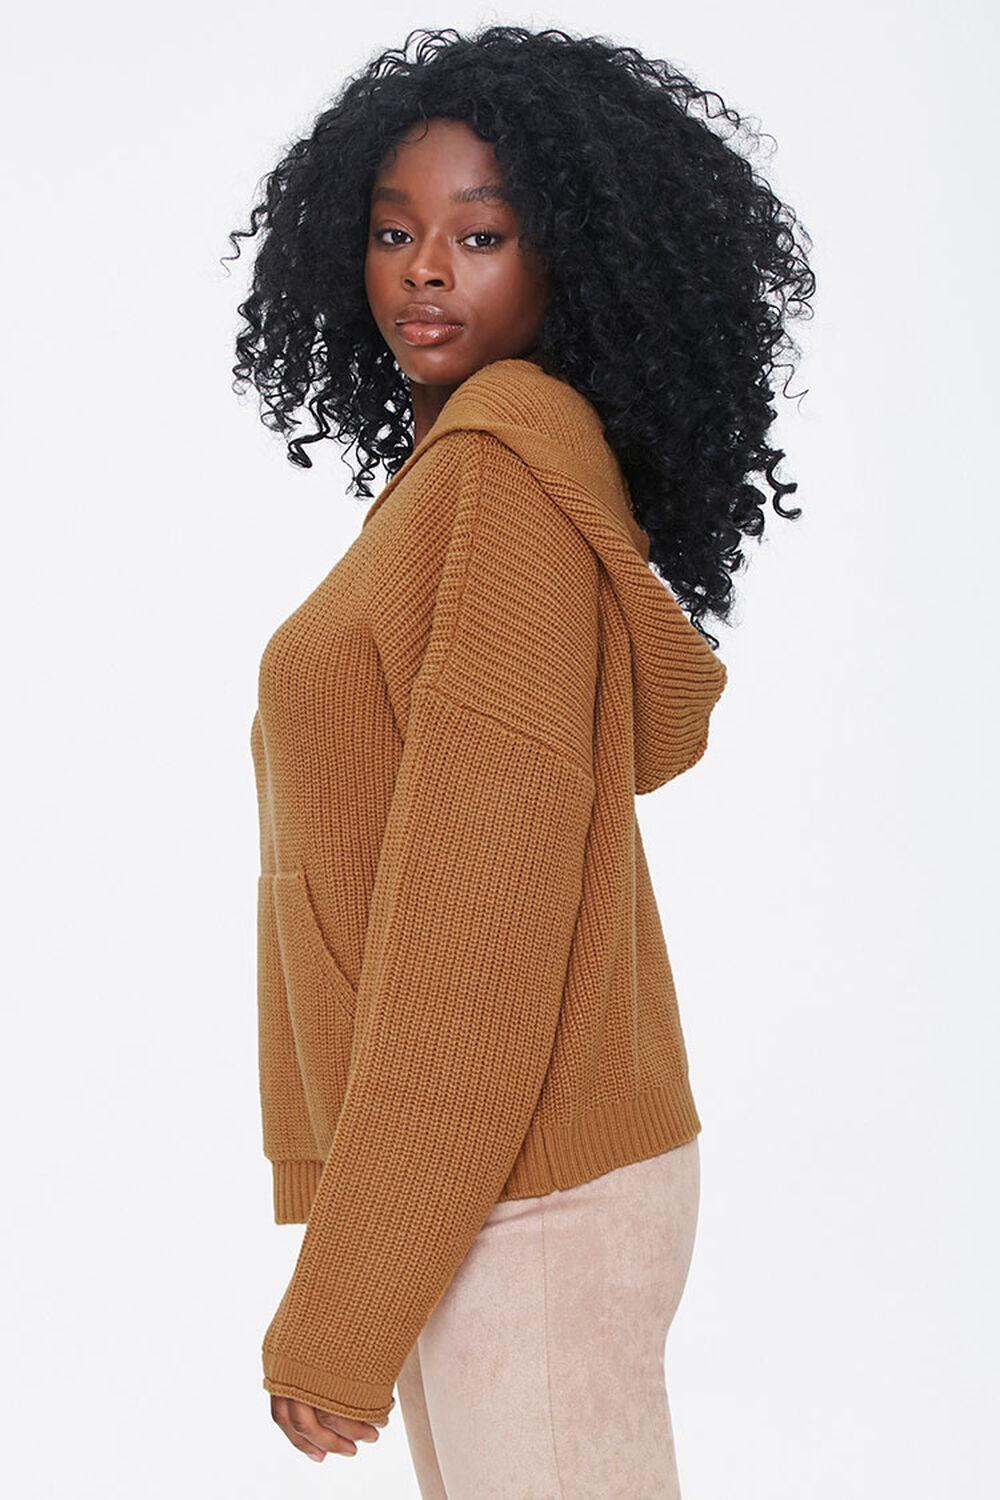 CAMEL Hooded Drop-Sleeve Sweater, image 3